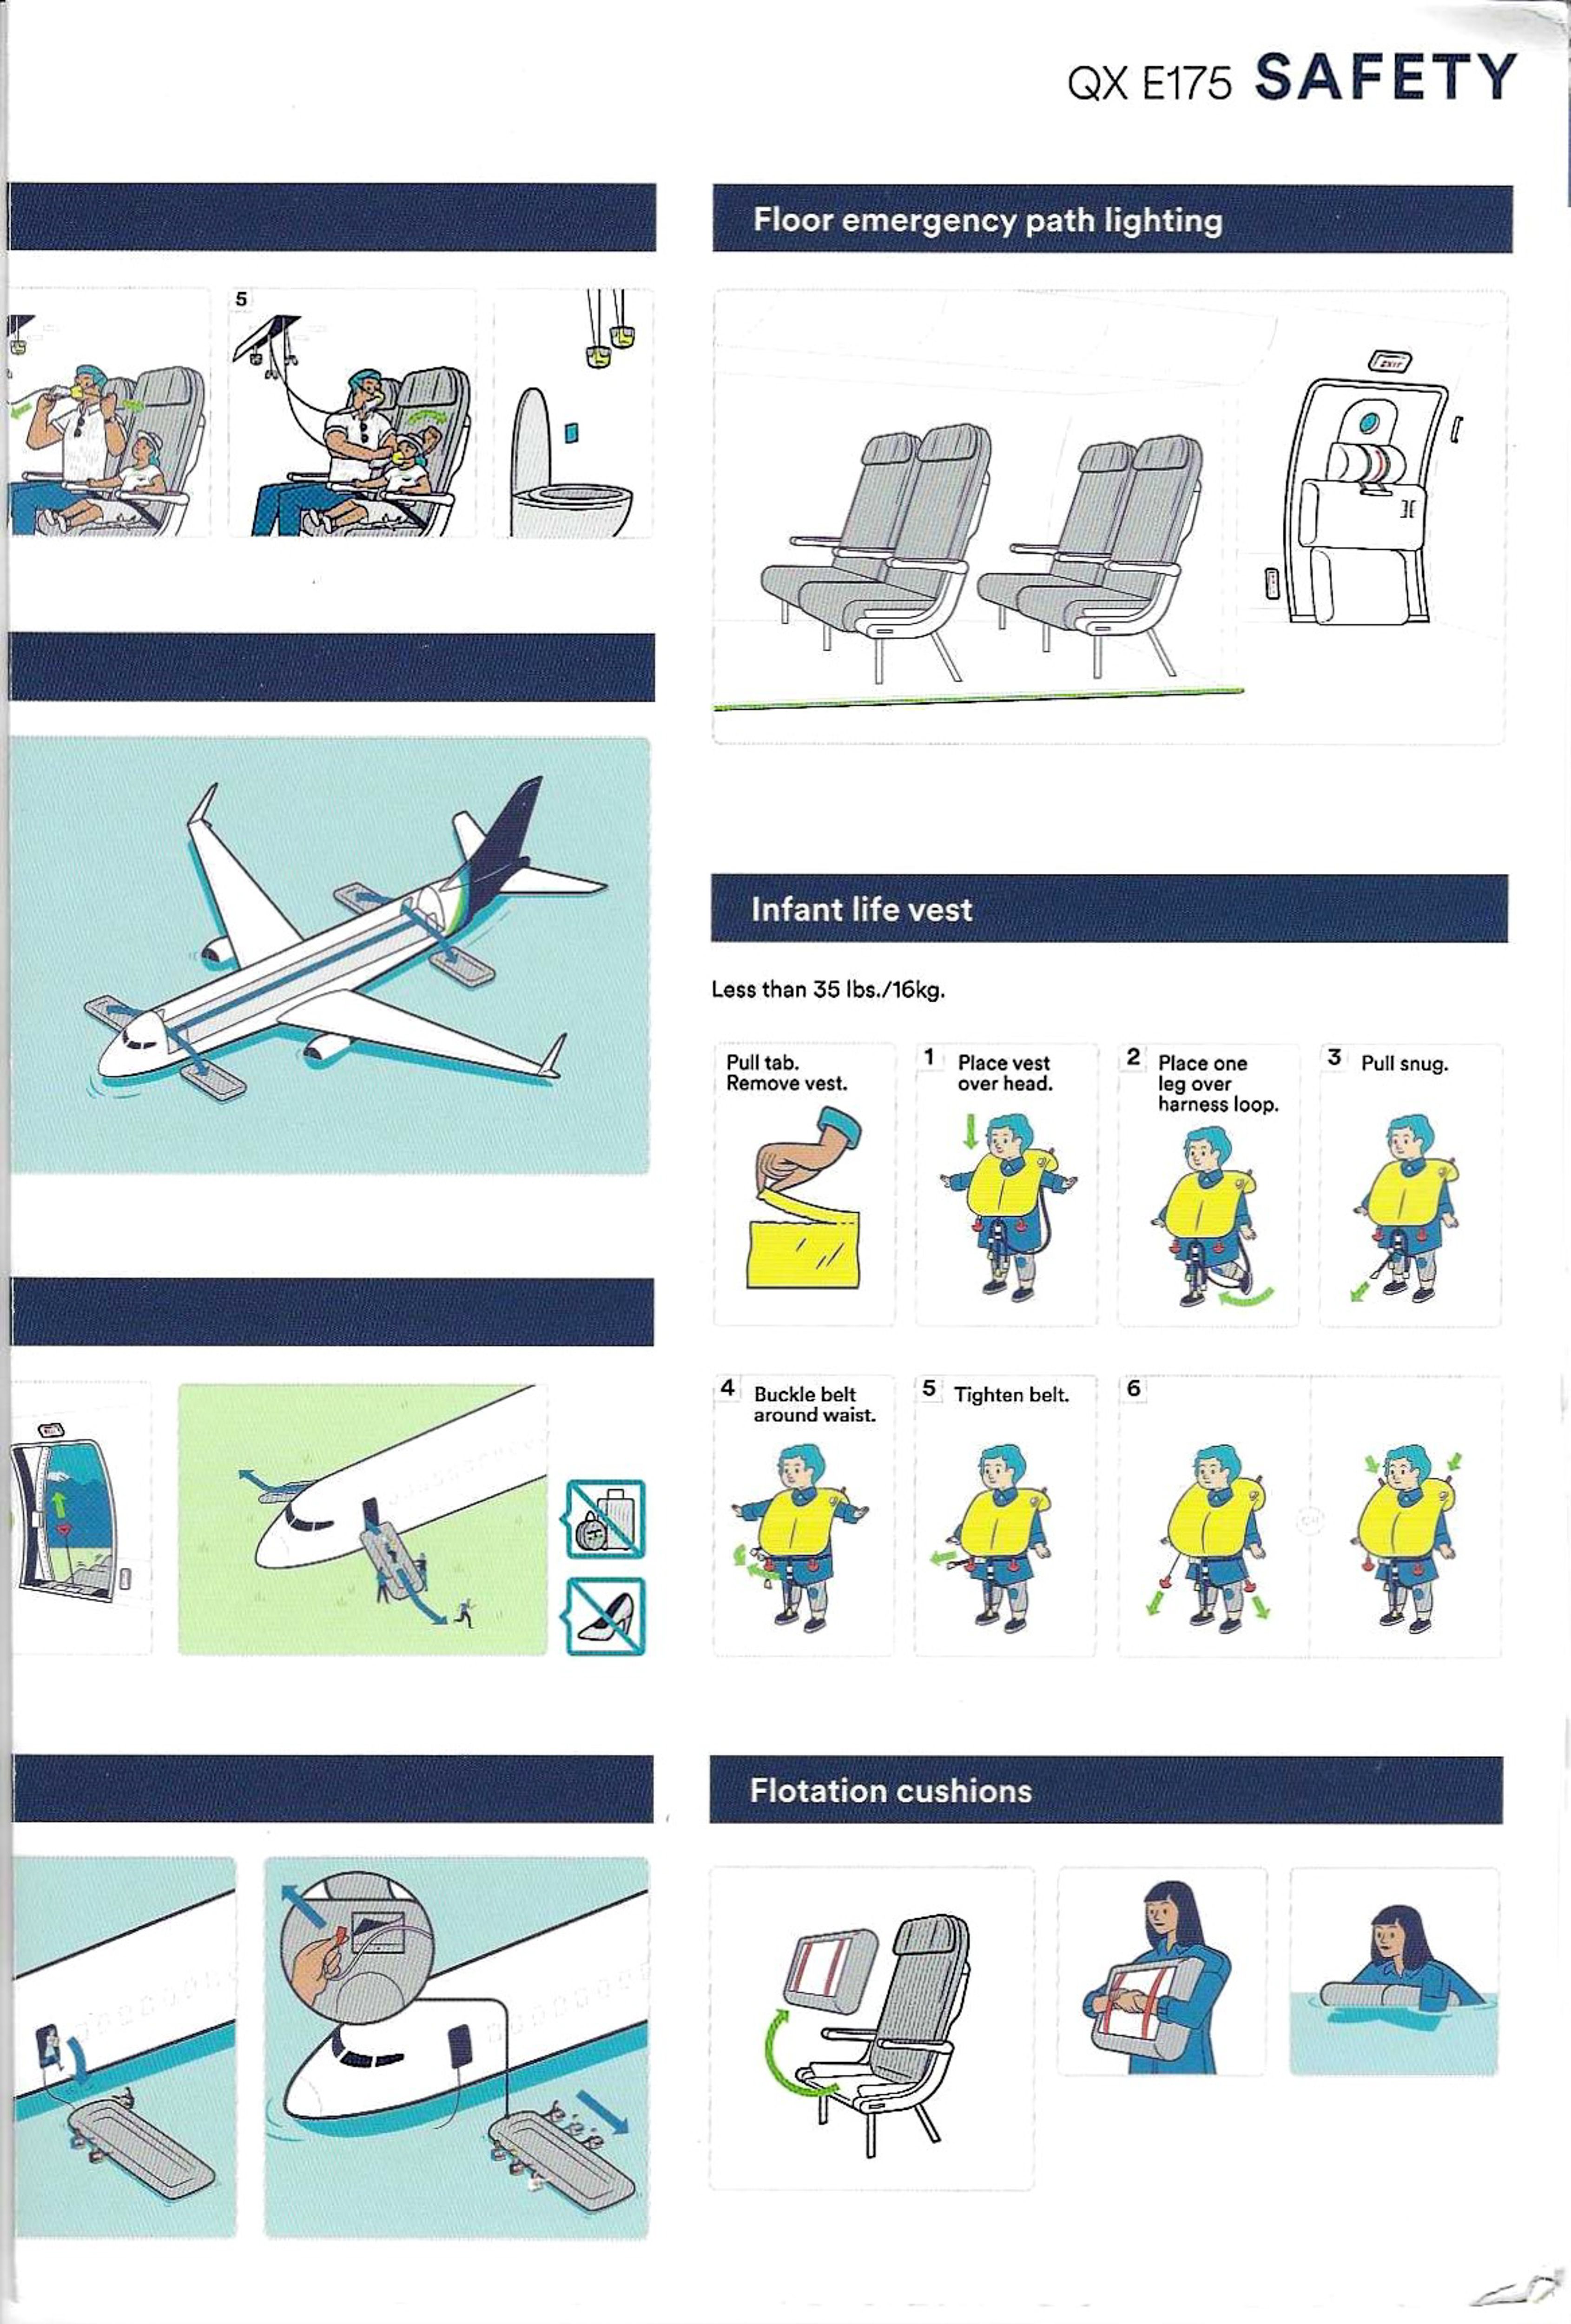 E175 Safety Card Page 03